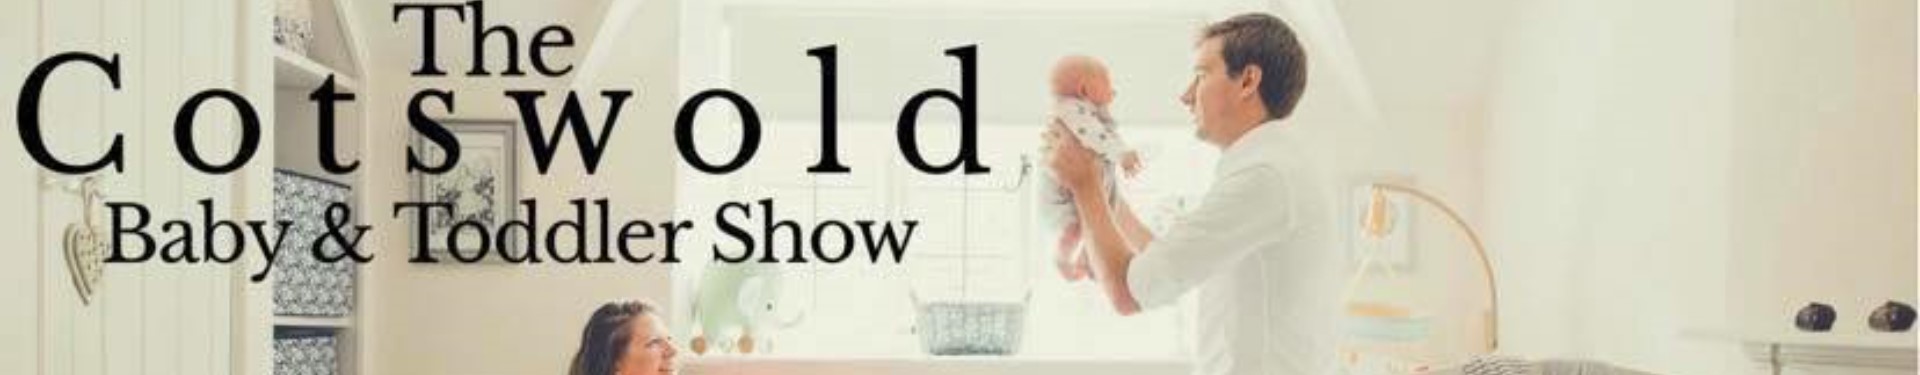 banner for Cotswold baby and toddler show